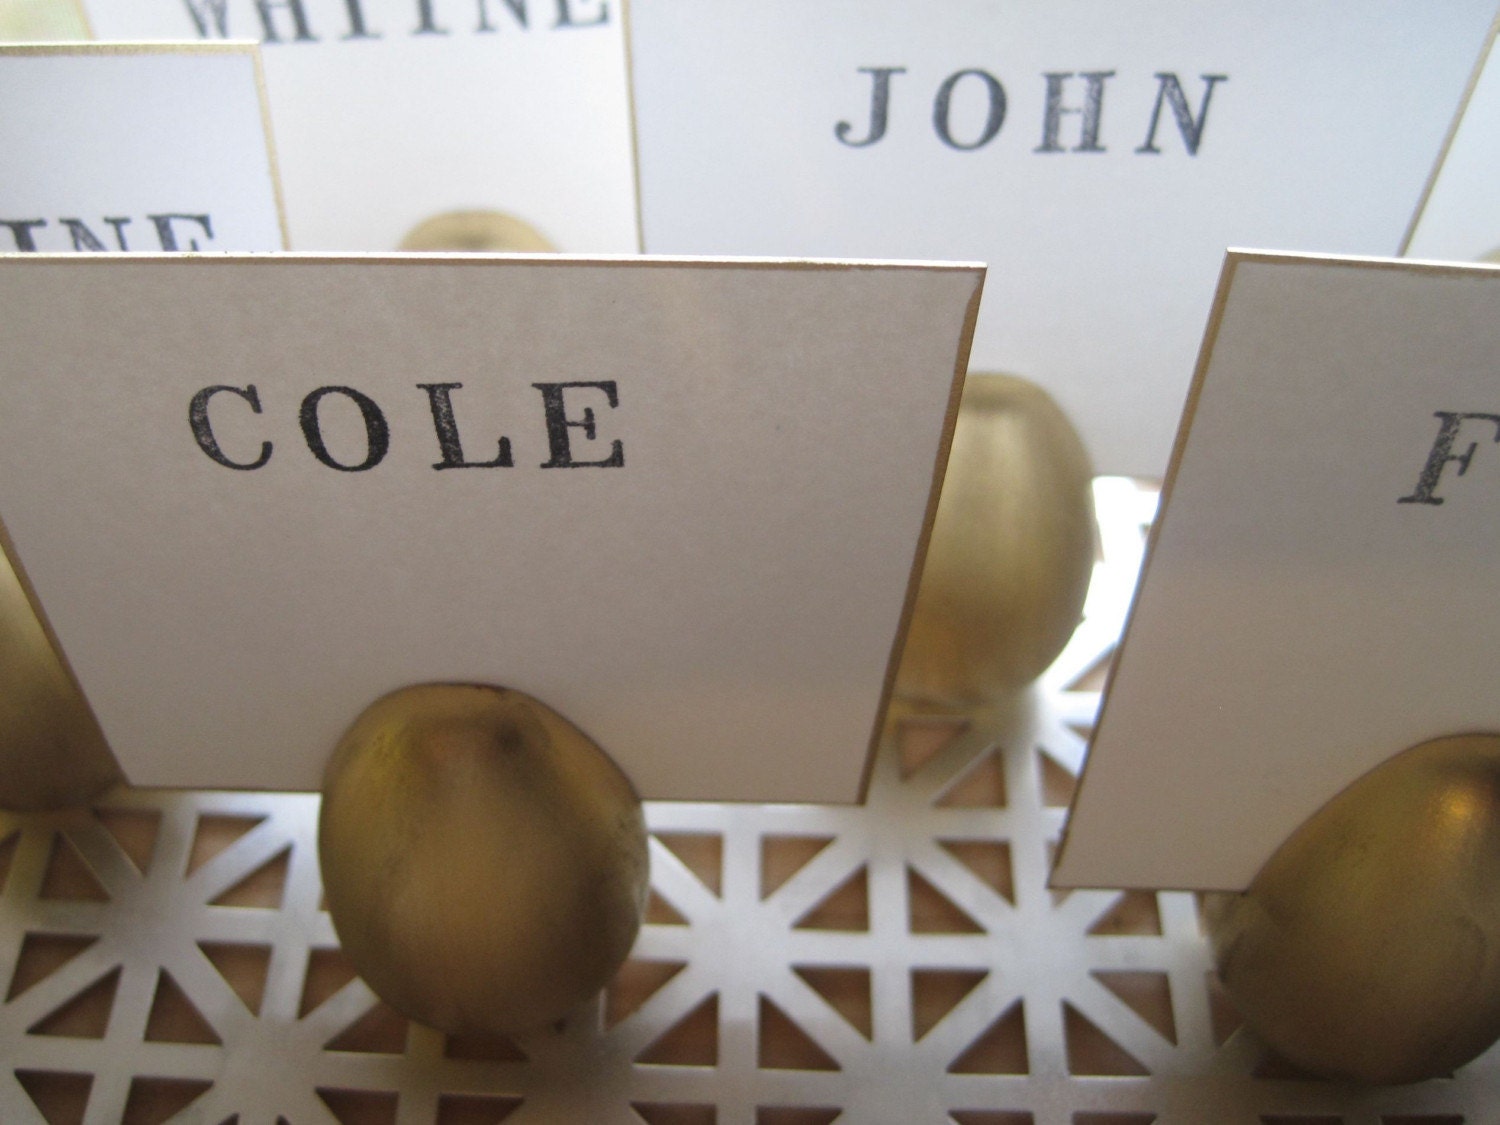 set of 6 Golden Egg place card holders with CUSTOM name -hand stamped cards... or use as photo holder